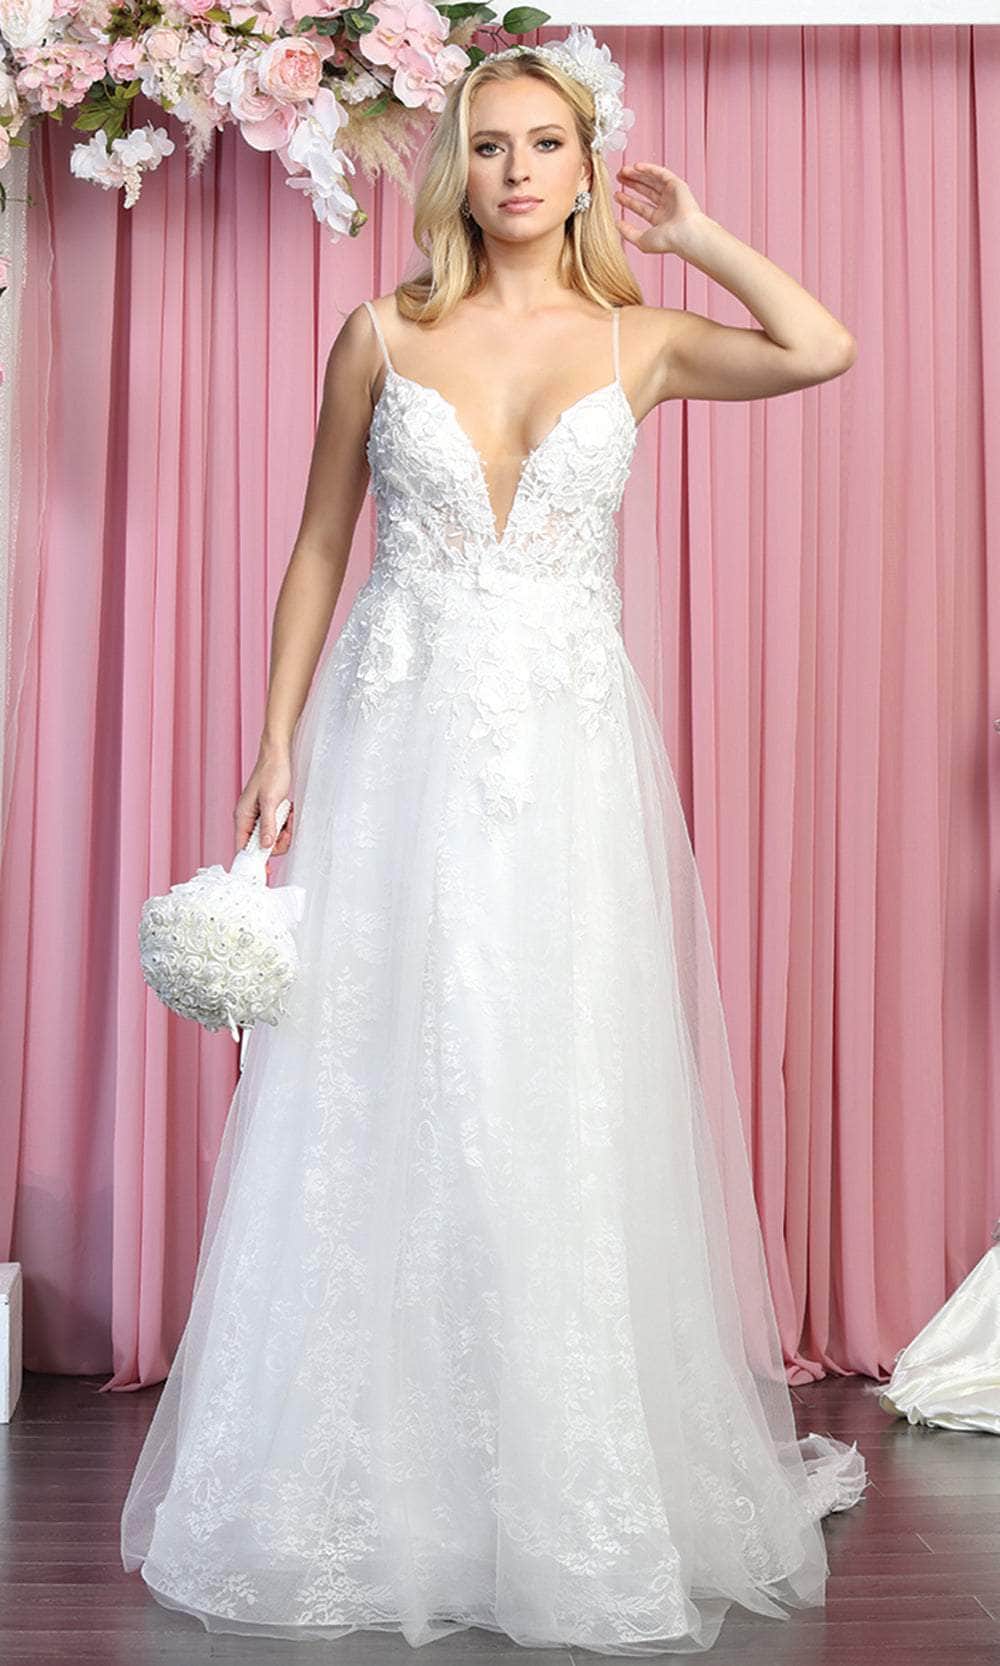 May Queen RQ7915 - Sleeveless Deep V-neck Bridal Gown Special Occasion Dress 4 / Ivory